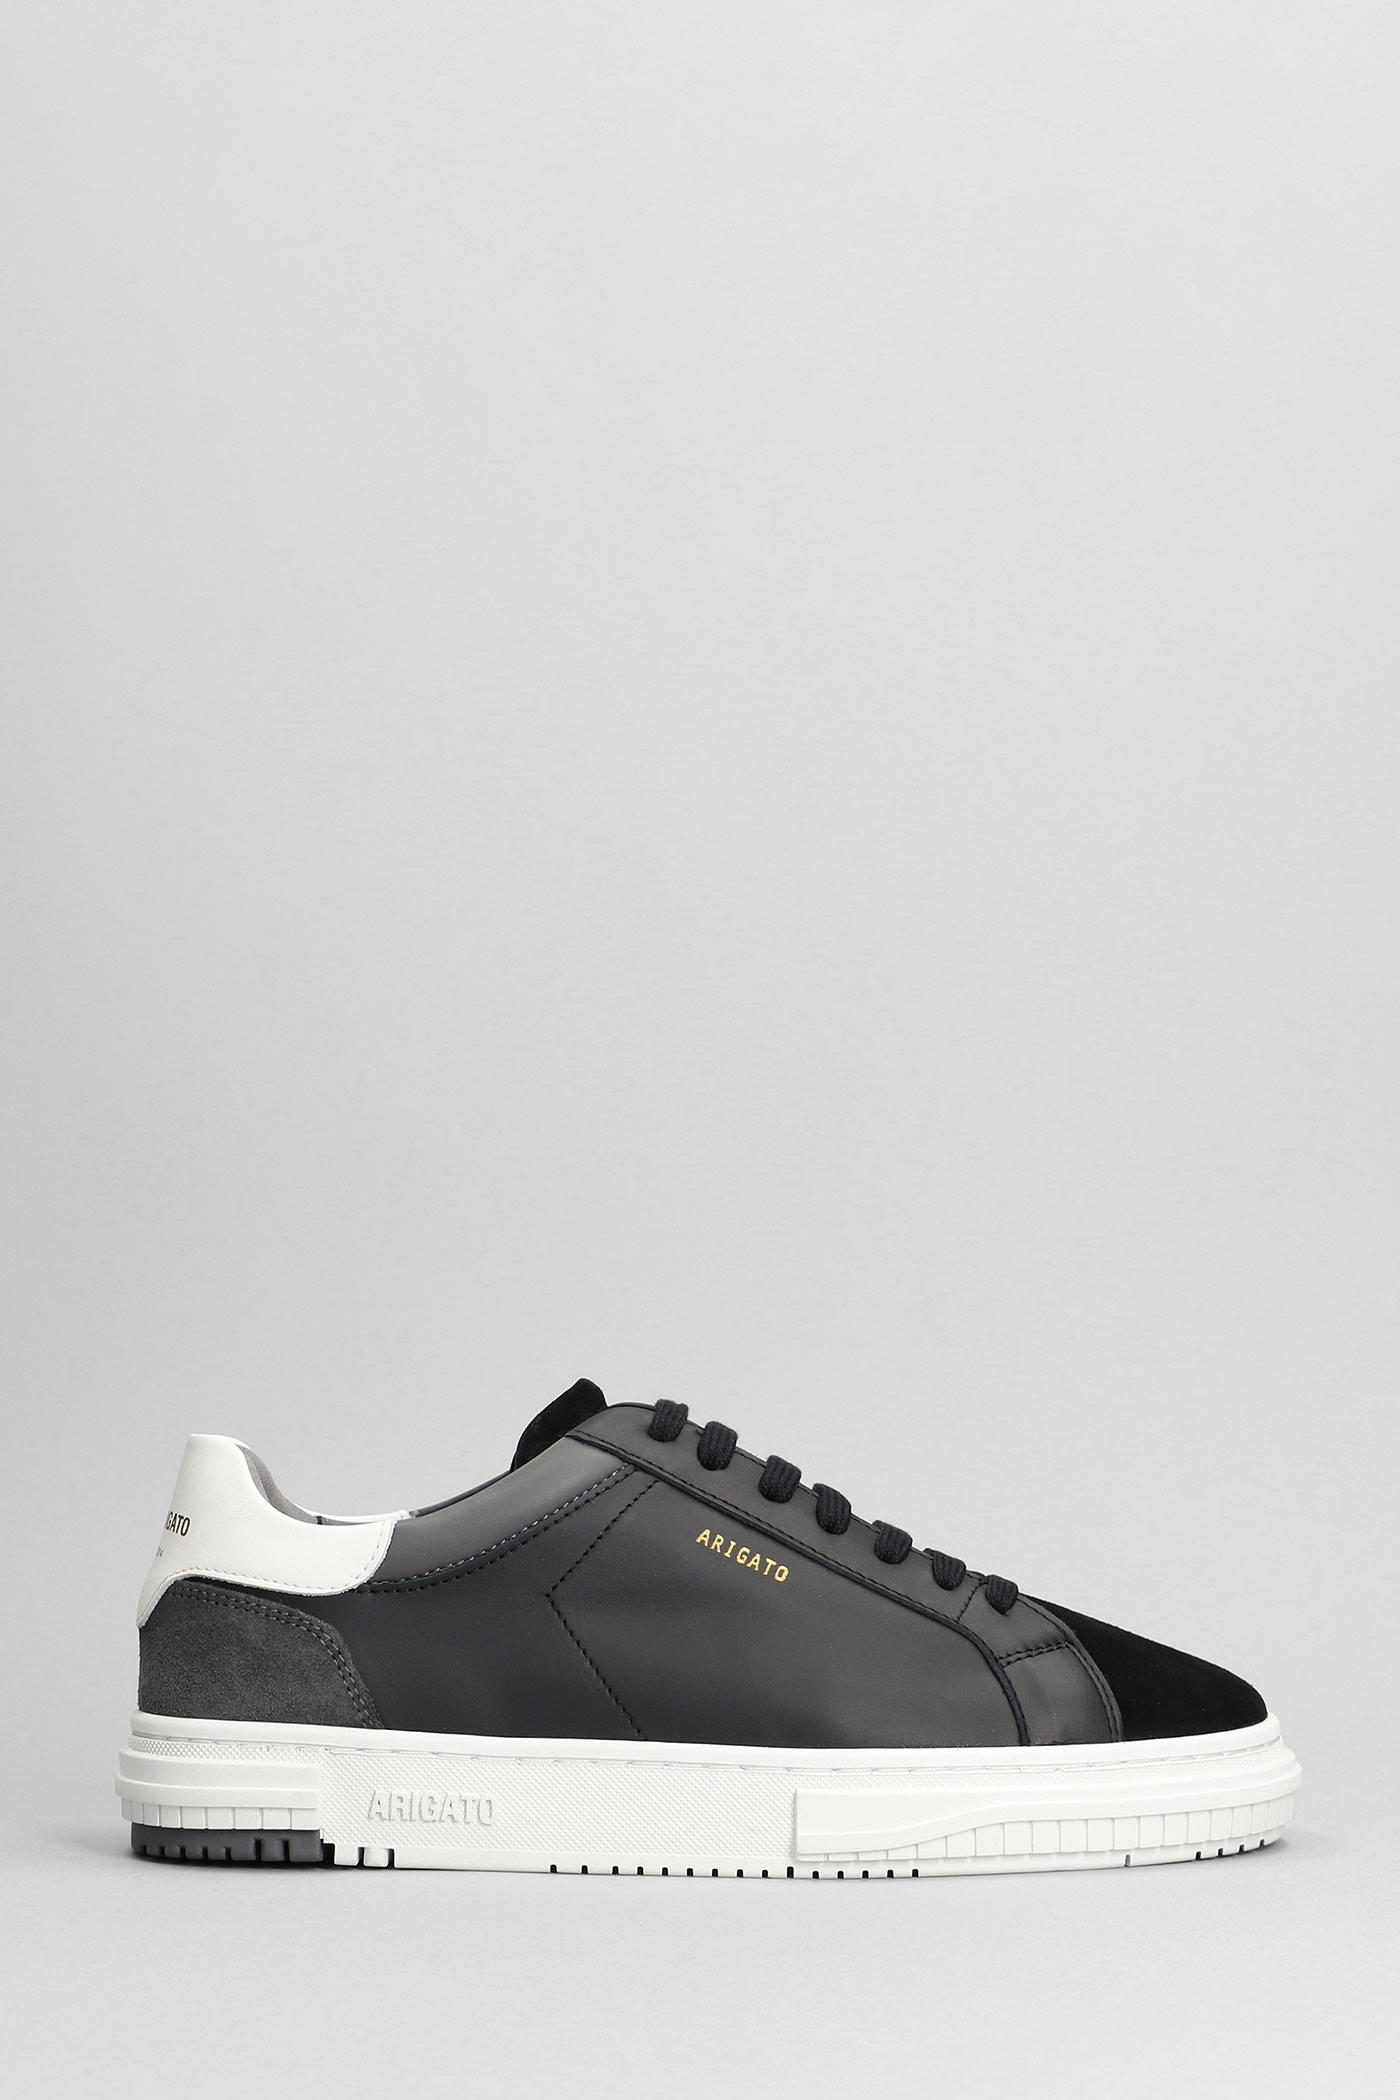 AXEL ARIGATO ATLAS SNEAKERS IN BLACK SUEDE AND LEATHER